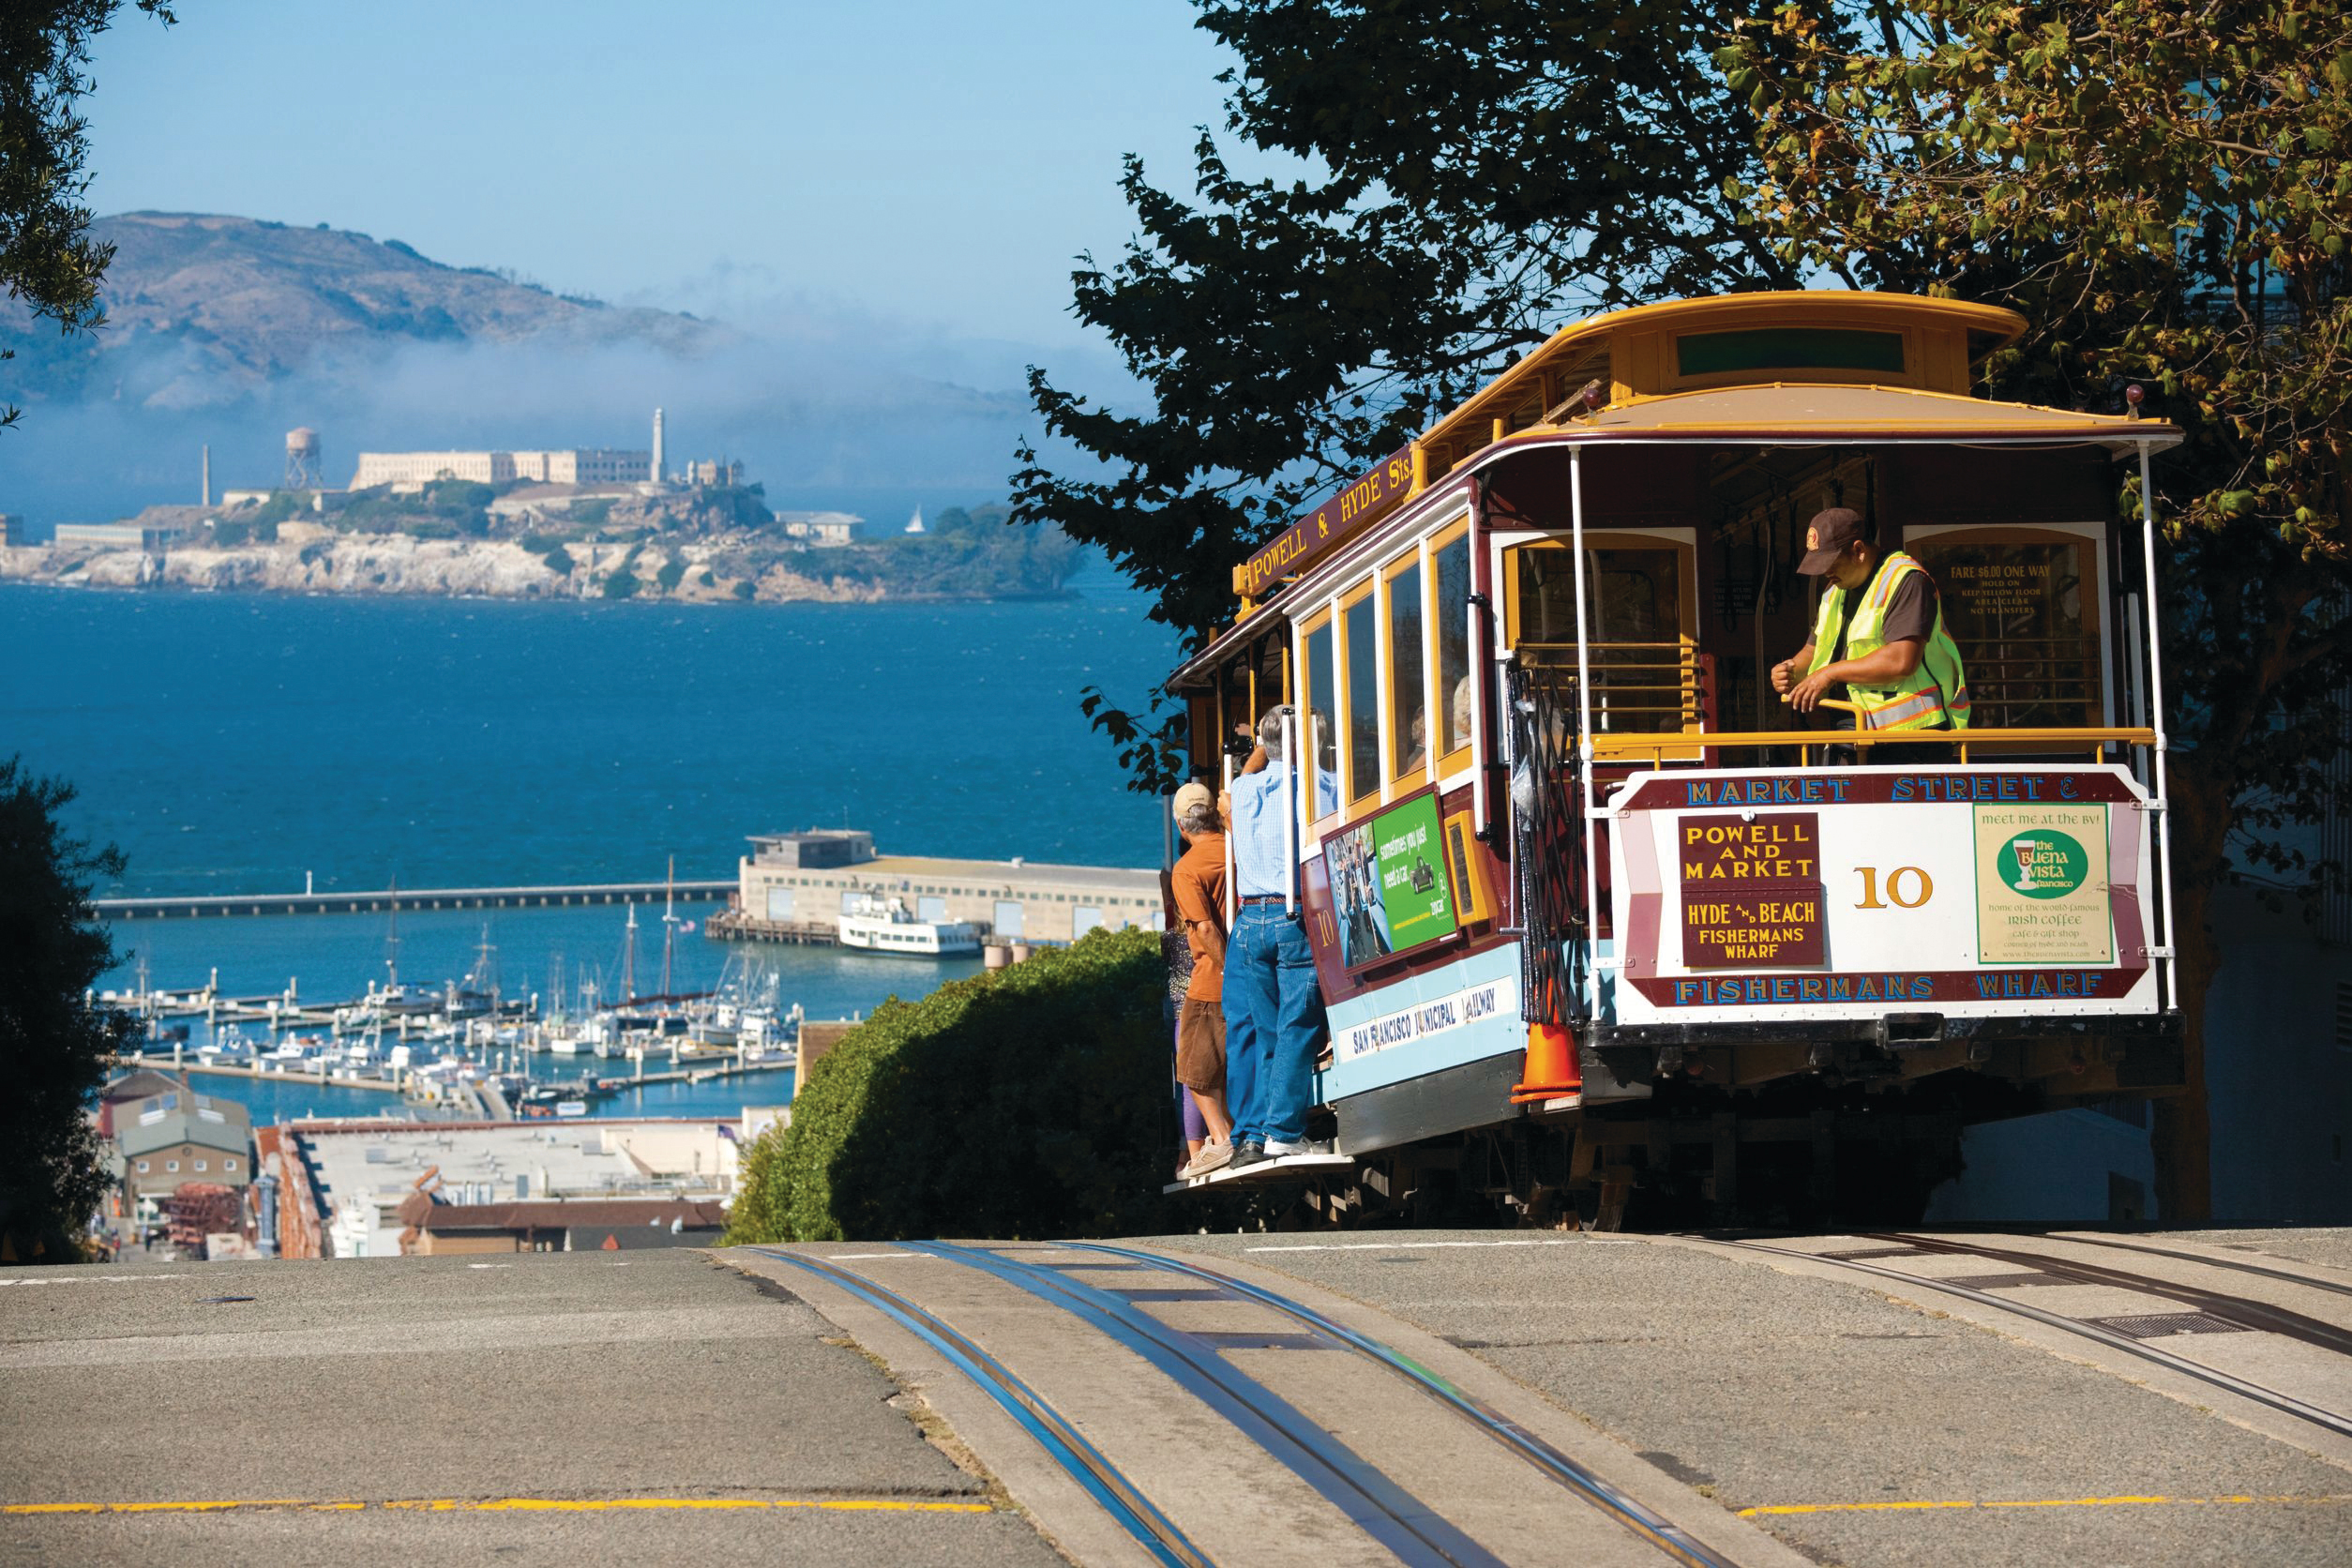 San Francisco Cable Car Accidents Costs Millions